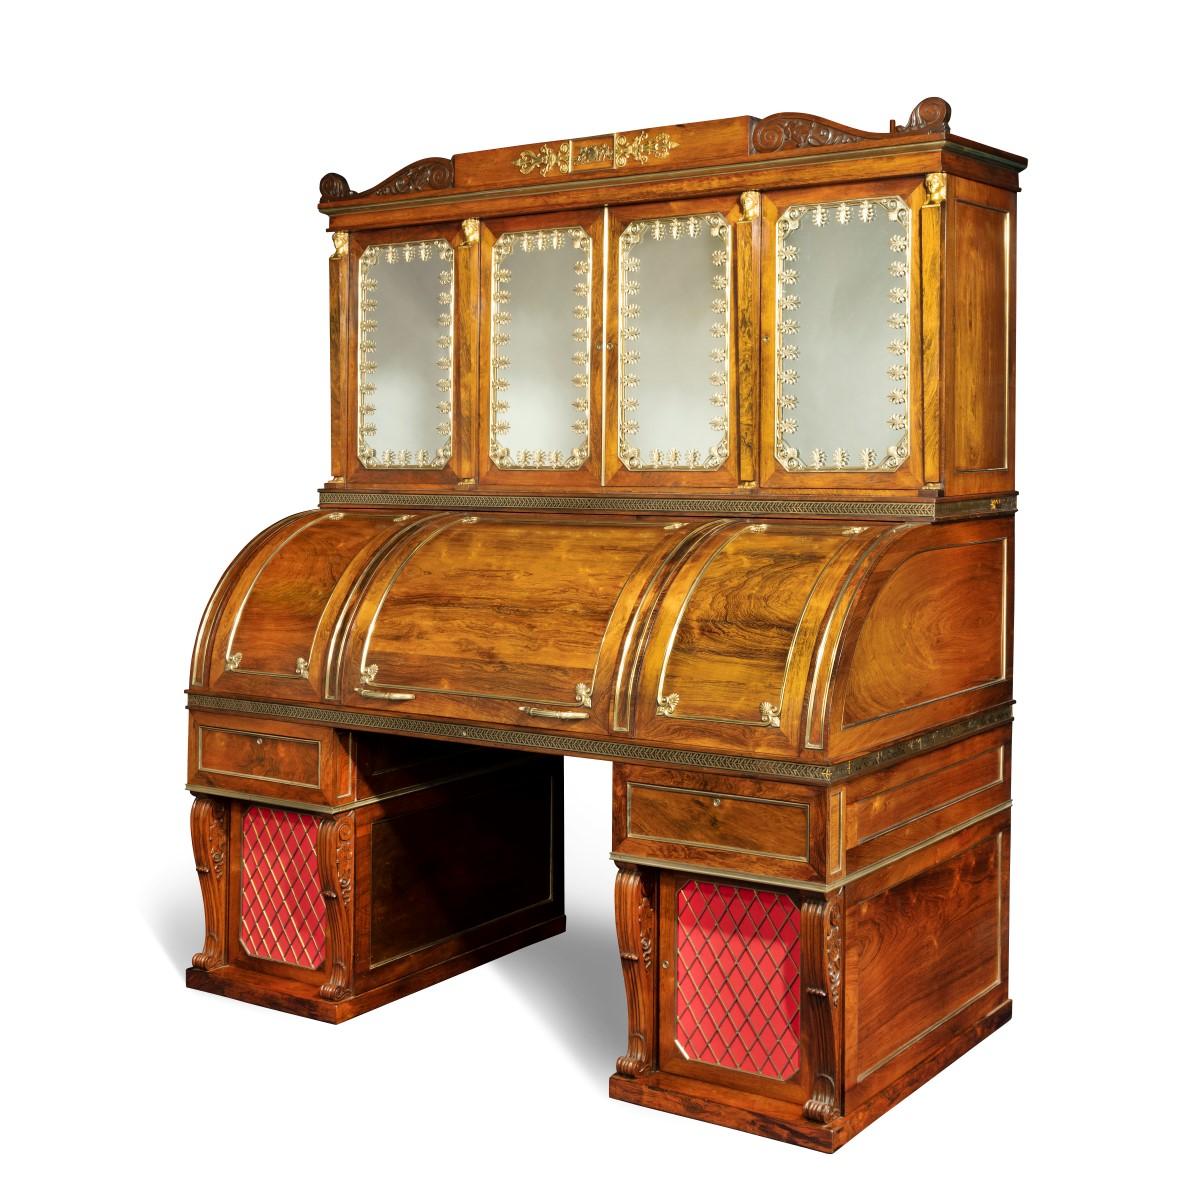 An impressive and monumental rosewood Regency kneehole bureau cabinet with ormolu mounts of exceptional quality, attributed to Seddon and Morel, the central roll-top opening to reveal a fitted secretaire in satinwood with a sliding leather-inset